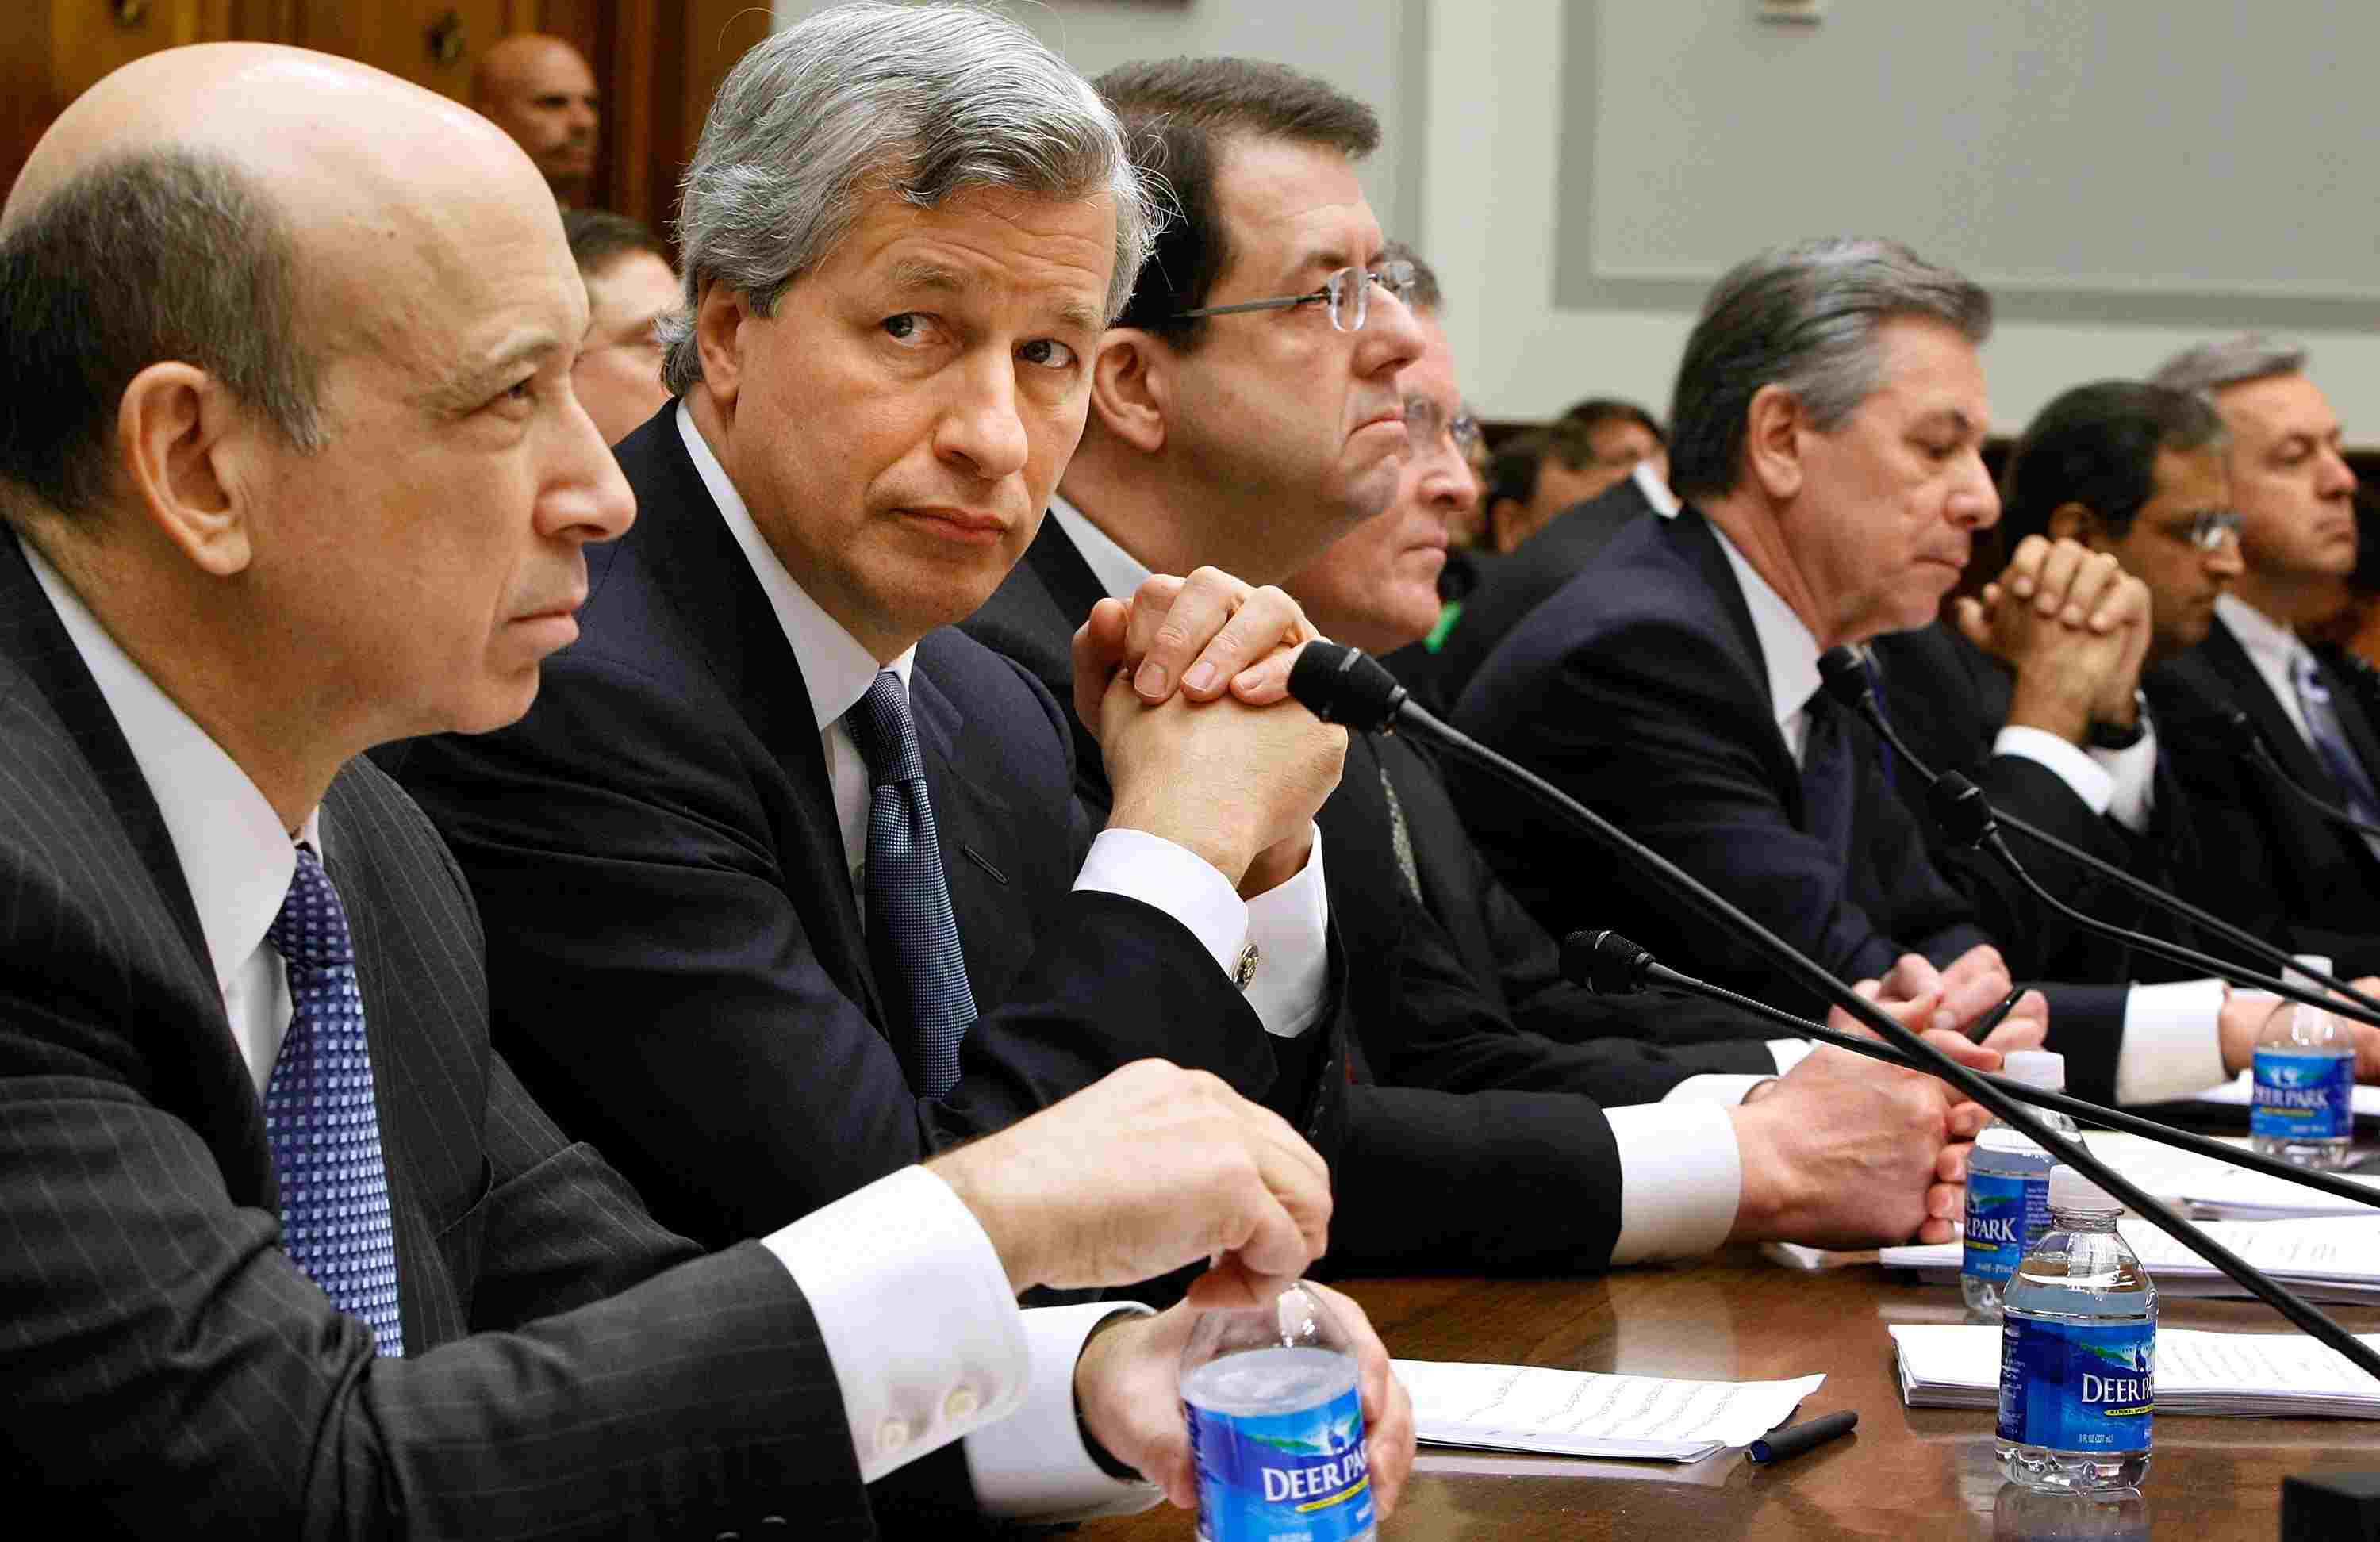 Bankers who took the bailout